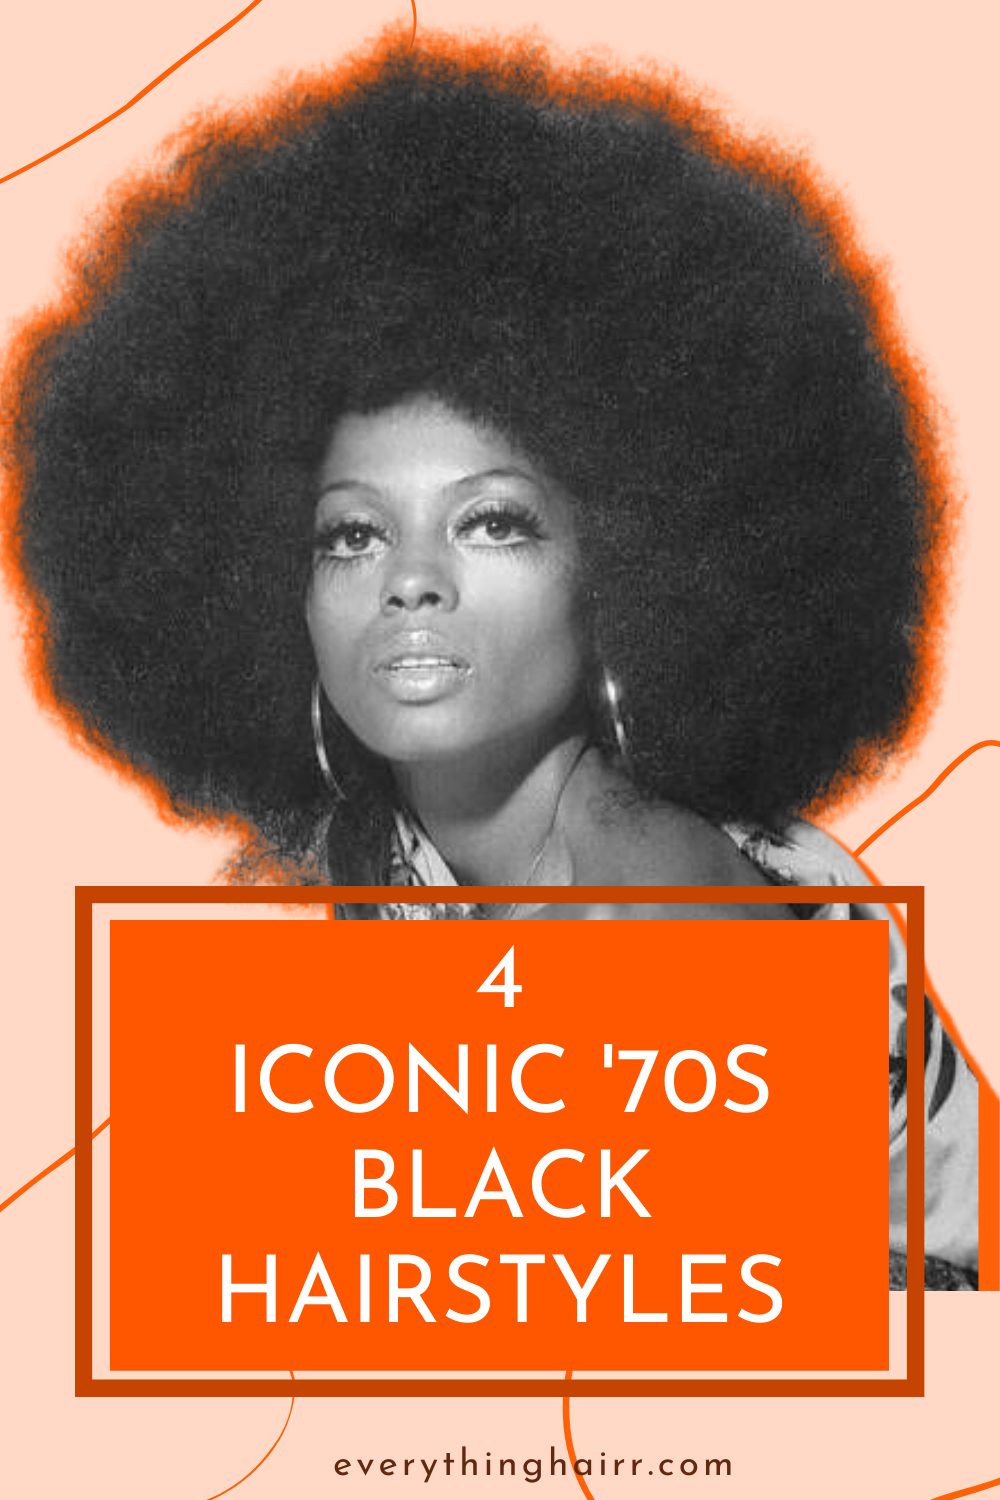 20 Chic 70s Hairstyles That Will Always Be in Style